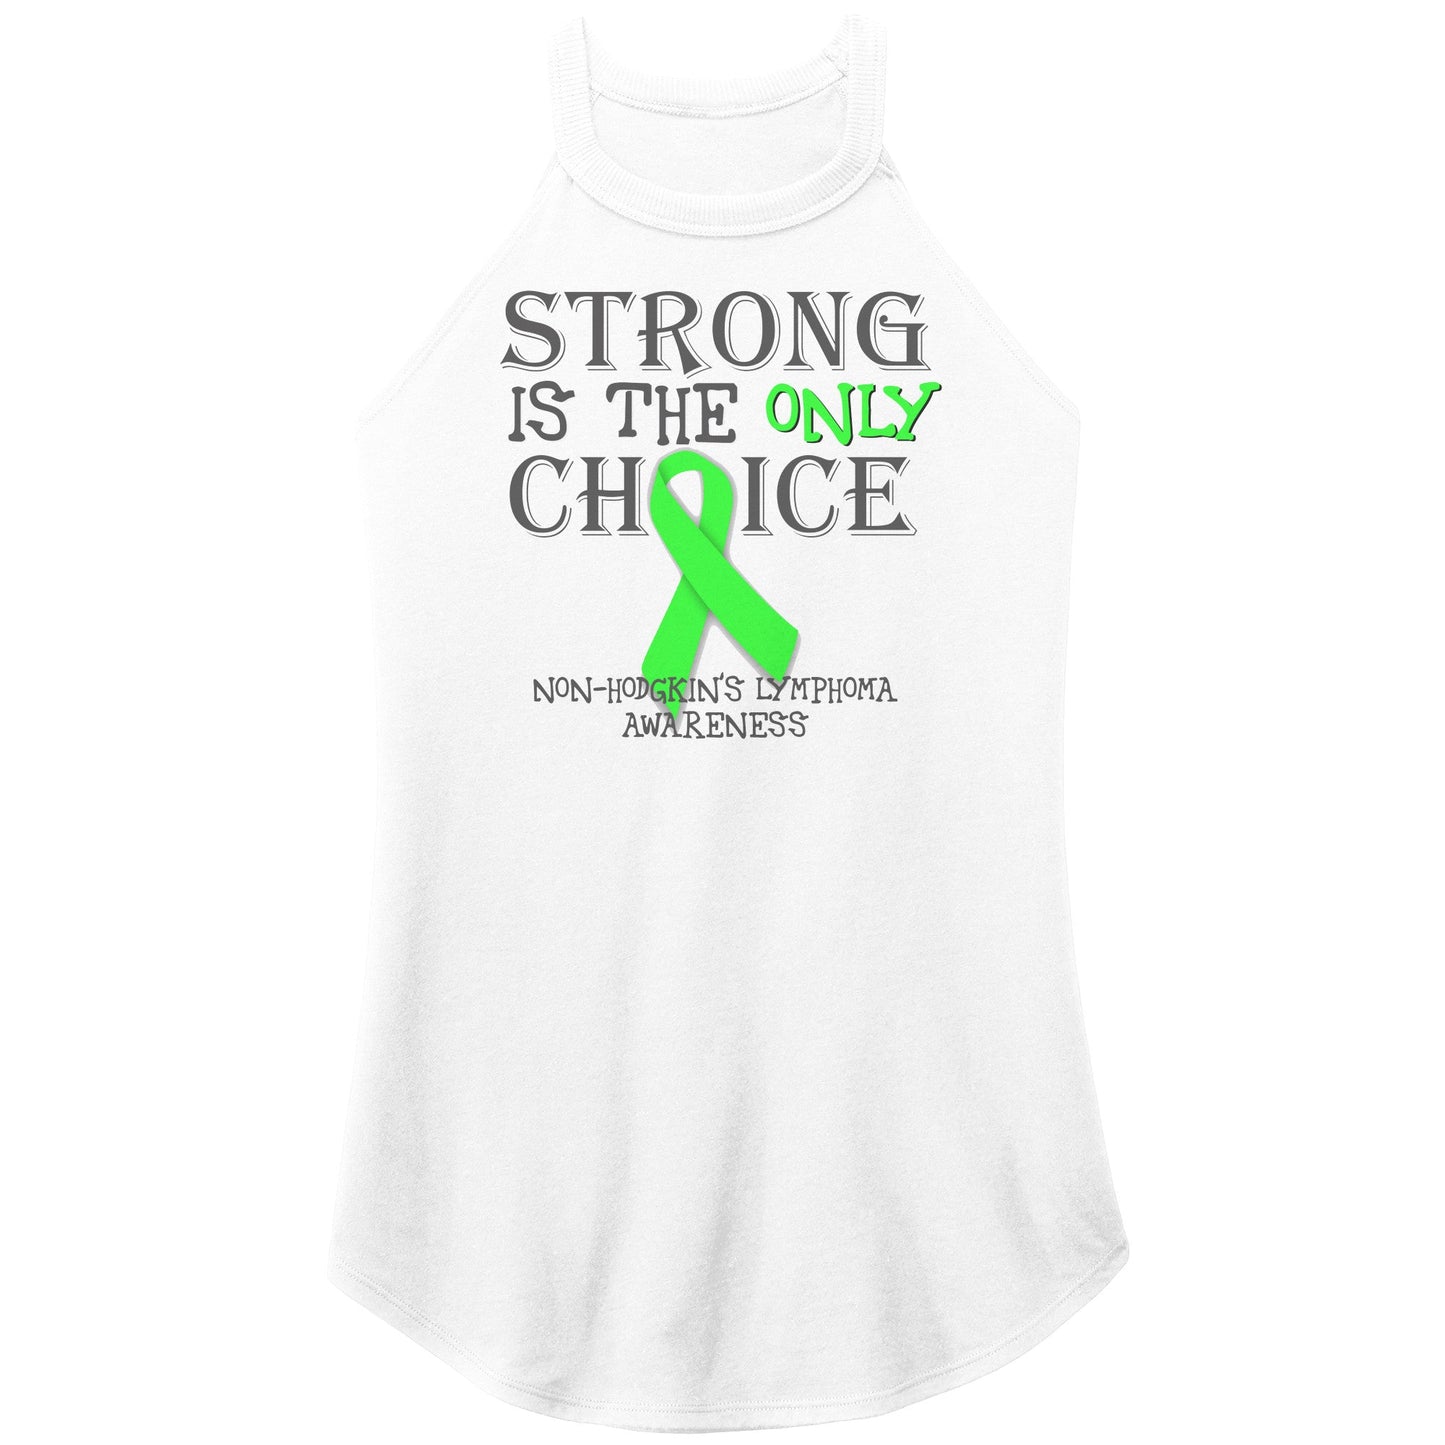 Strong is the Only Choice -Non-Hodgkin's Lymphoma Awareness T-Shirt, Hoodie, Tank |x|